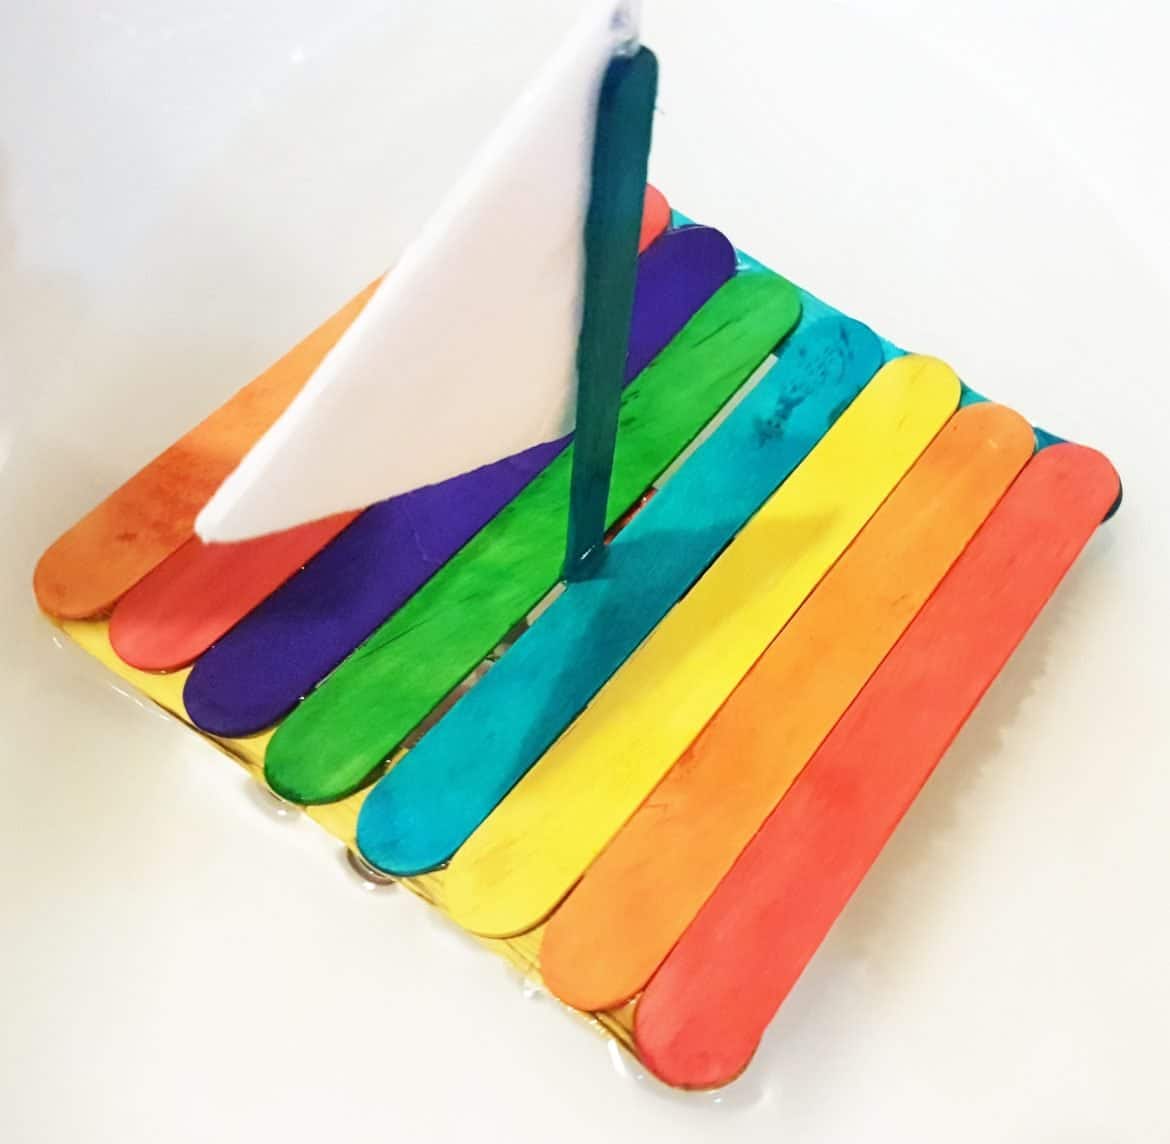 This incredible Rainbow Floating Raft is perfect for a hot summer day! #summercrafts #boycrafts #raftcraft